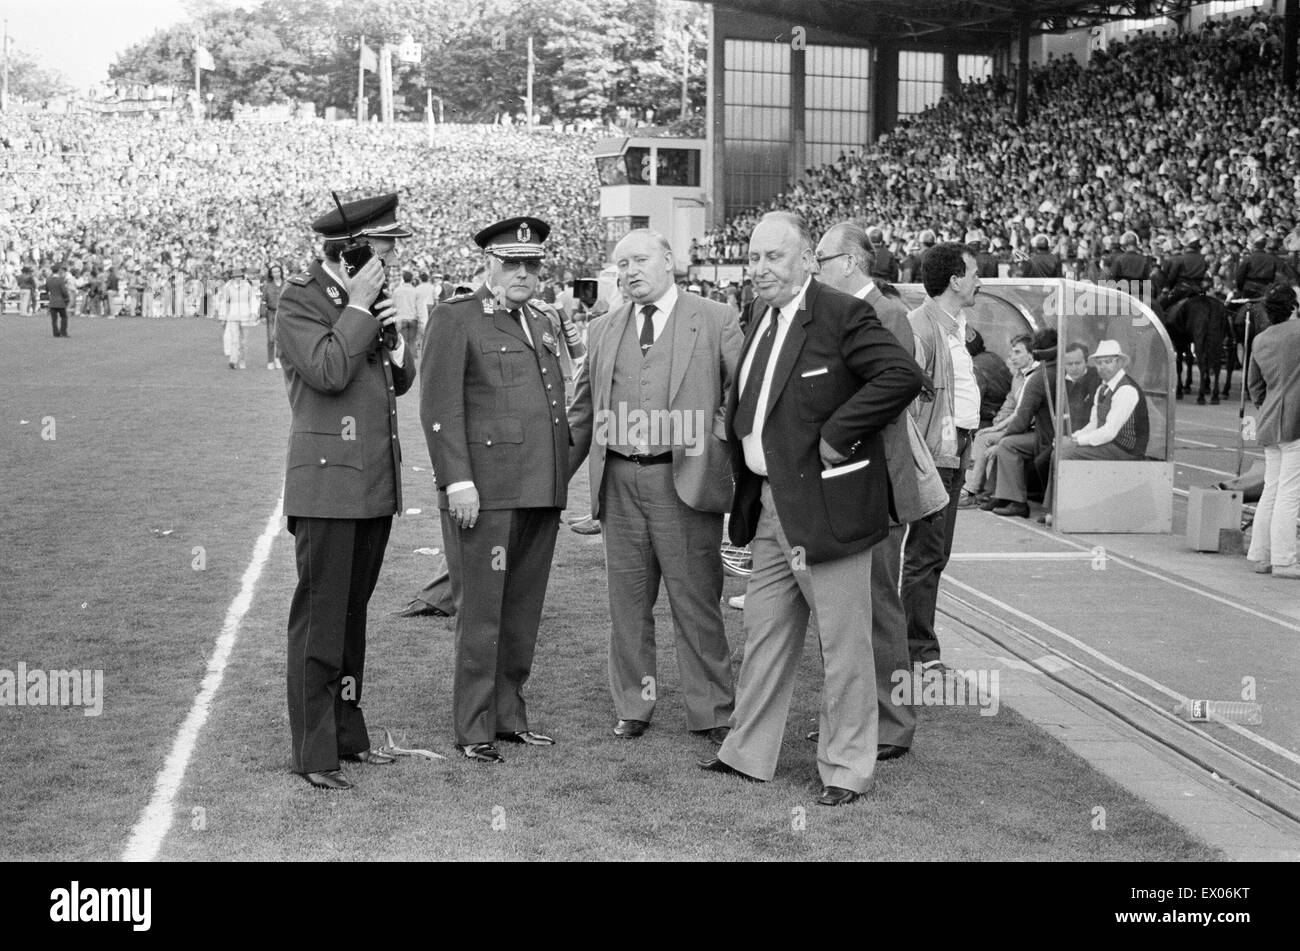 Juventus 1-0 Liverpool, 1985 European Cup Final, Heysel Stadium, Brussels, Wednesday 29th May 1985. Crowd Violence. Match Officials. Stock Photo